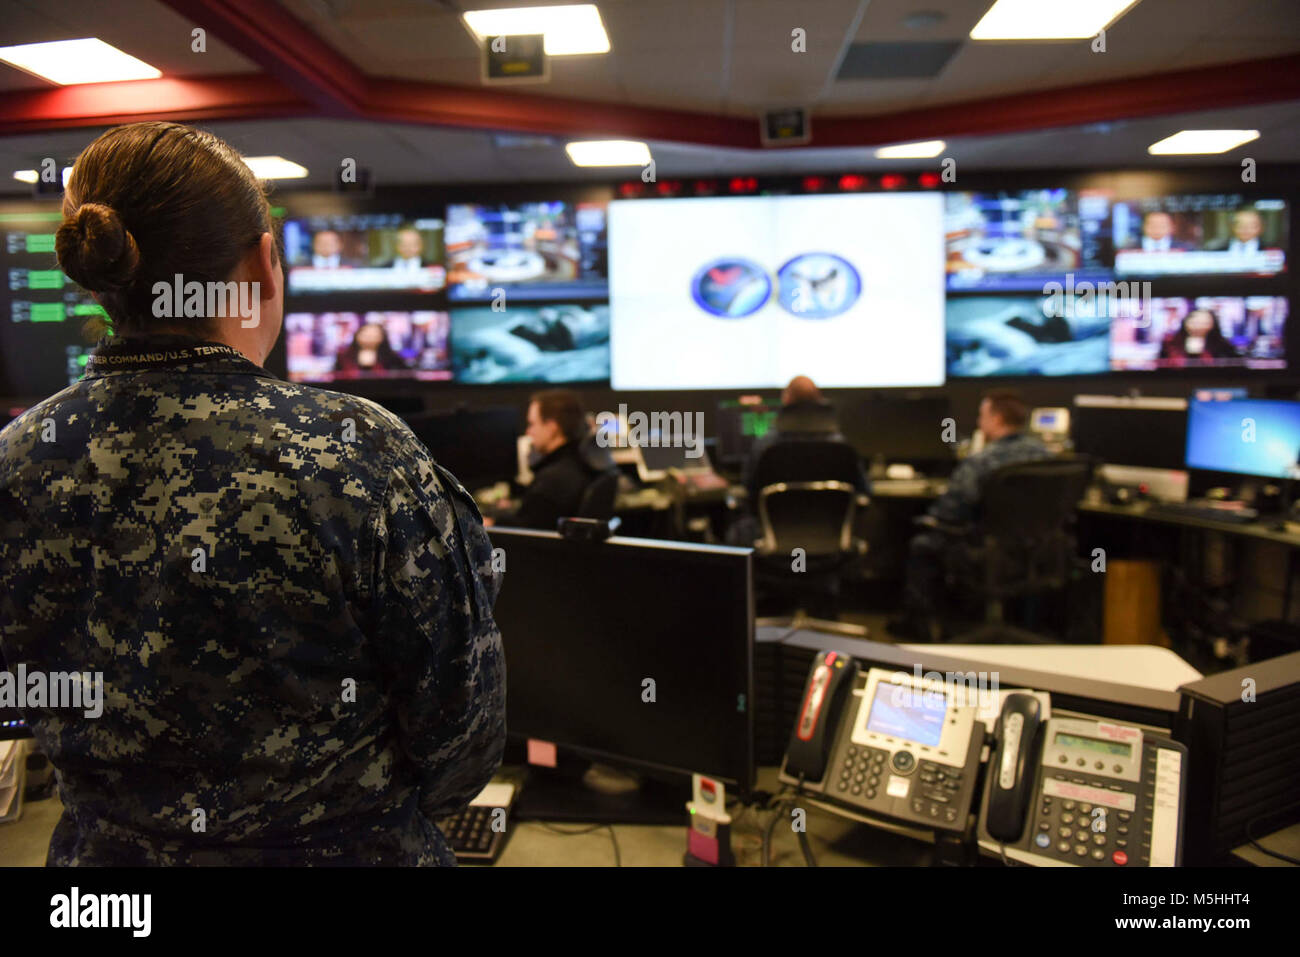 FORT GEORGE G. MEADE, Md. (Dec. 14, 2017) Sailors stand watch in the Fleet Operations Center at the headquarters of U.S. Fleet Cyber Command/U.S. 10th Fleet. U.S. Fleet Cyber Command serves as the Navy component command to U.S. Strategic Command and U.S. Cyber Command. U.S. 10th Fleet is the operational arm of Fleet Cyber Command and executes its mission through a task force structure. (U.S. Navy Stock Photo